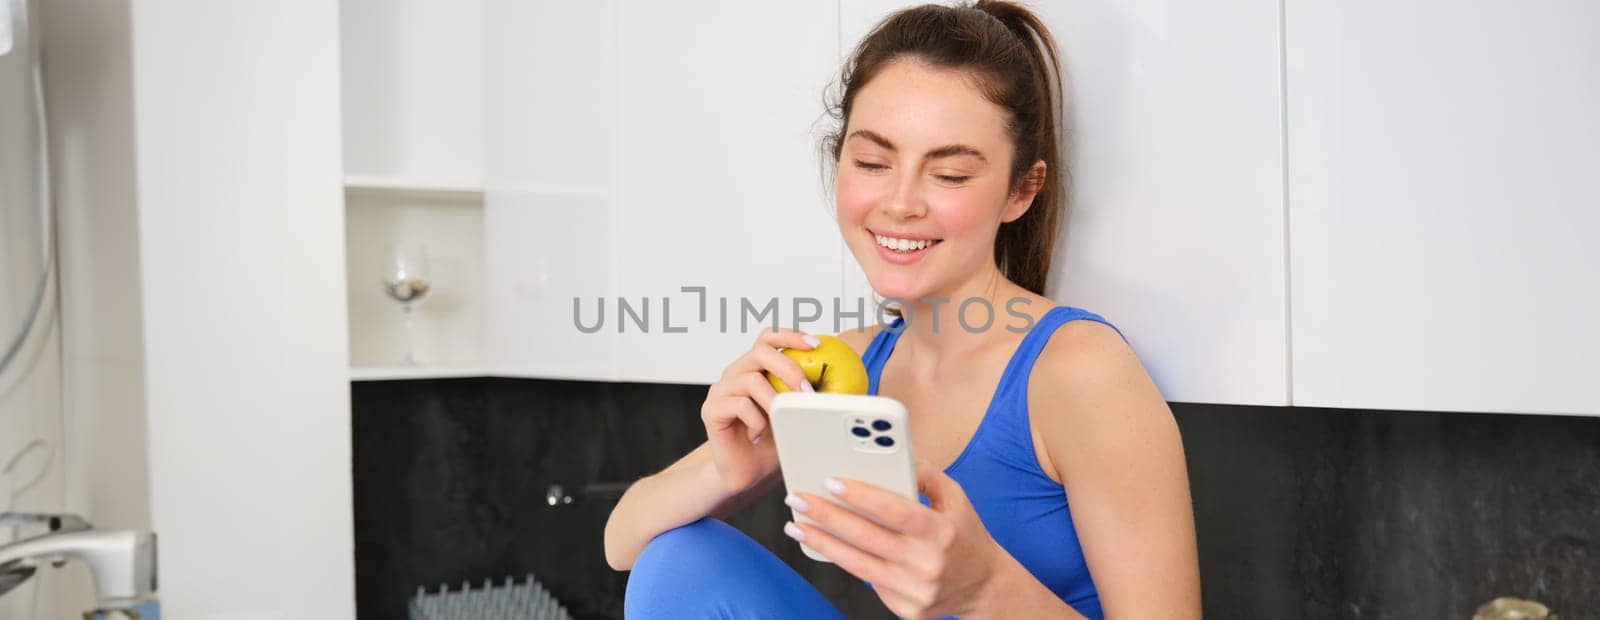 Healthy lifestyle and technology. Young beautiful girl, fitness instructor, looking at smartphone, reading on mobile phone and eating an apple, smiling happily.